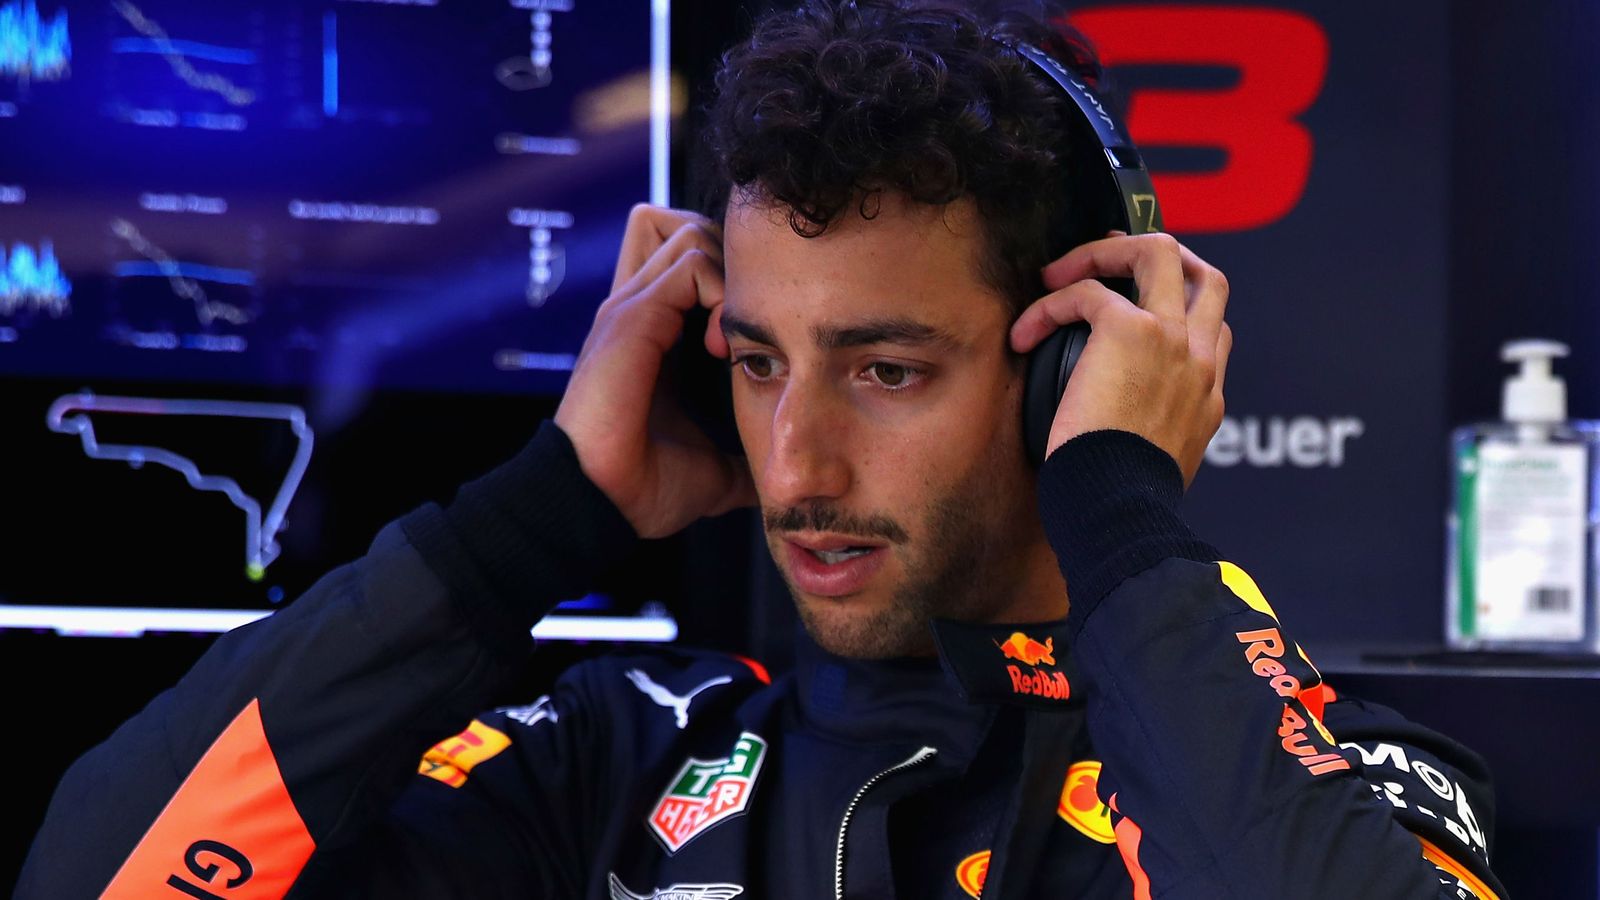 Red Bull play down Daniel Ricciardo rant after 'cursed' comments | F1 News